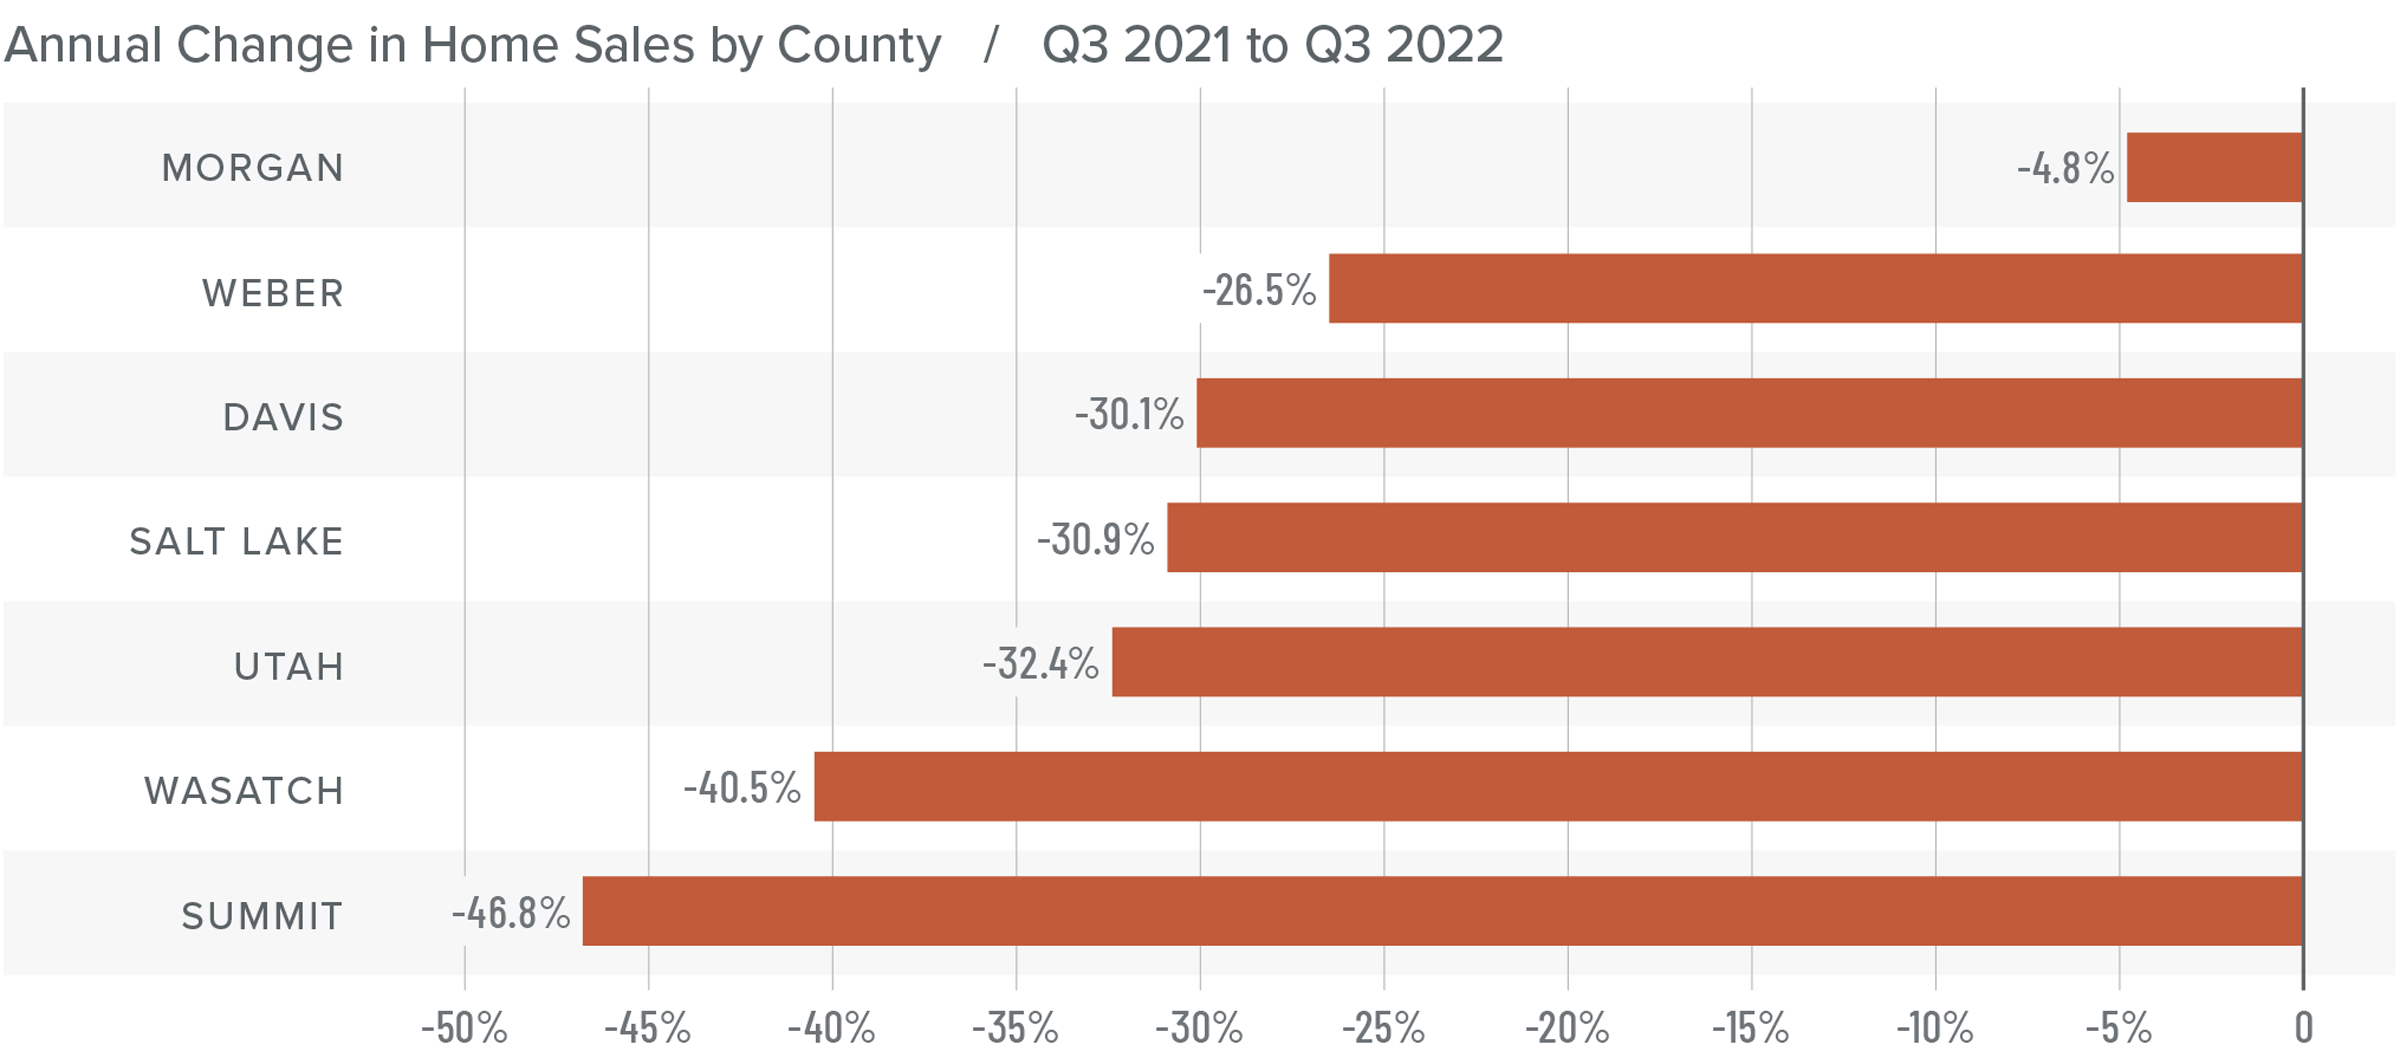 A bar graph showing the annual change in home sales for various counties in Utah from Q3 2021 to Q3 2022. All counties have a negative percentage year-over-year change. Morgan County tops the list at -4.8%, followed by Weber at -26.5%, Davis -30.1%, Salt Lake -30.9%, Utah -32.4%, Wasatch -40.5%, and Summit at -46.8%.